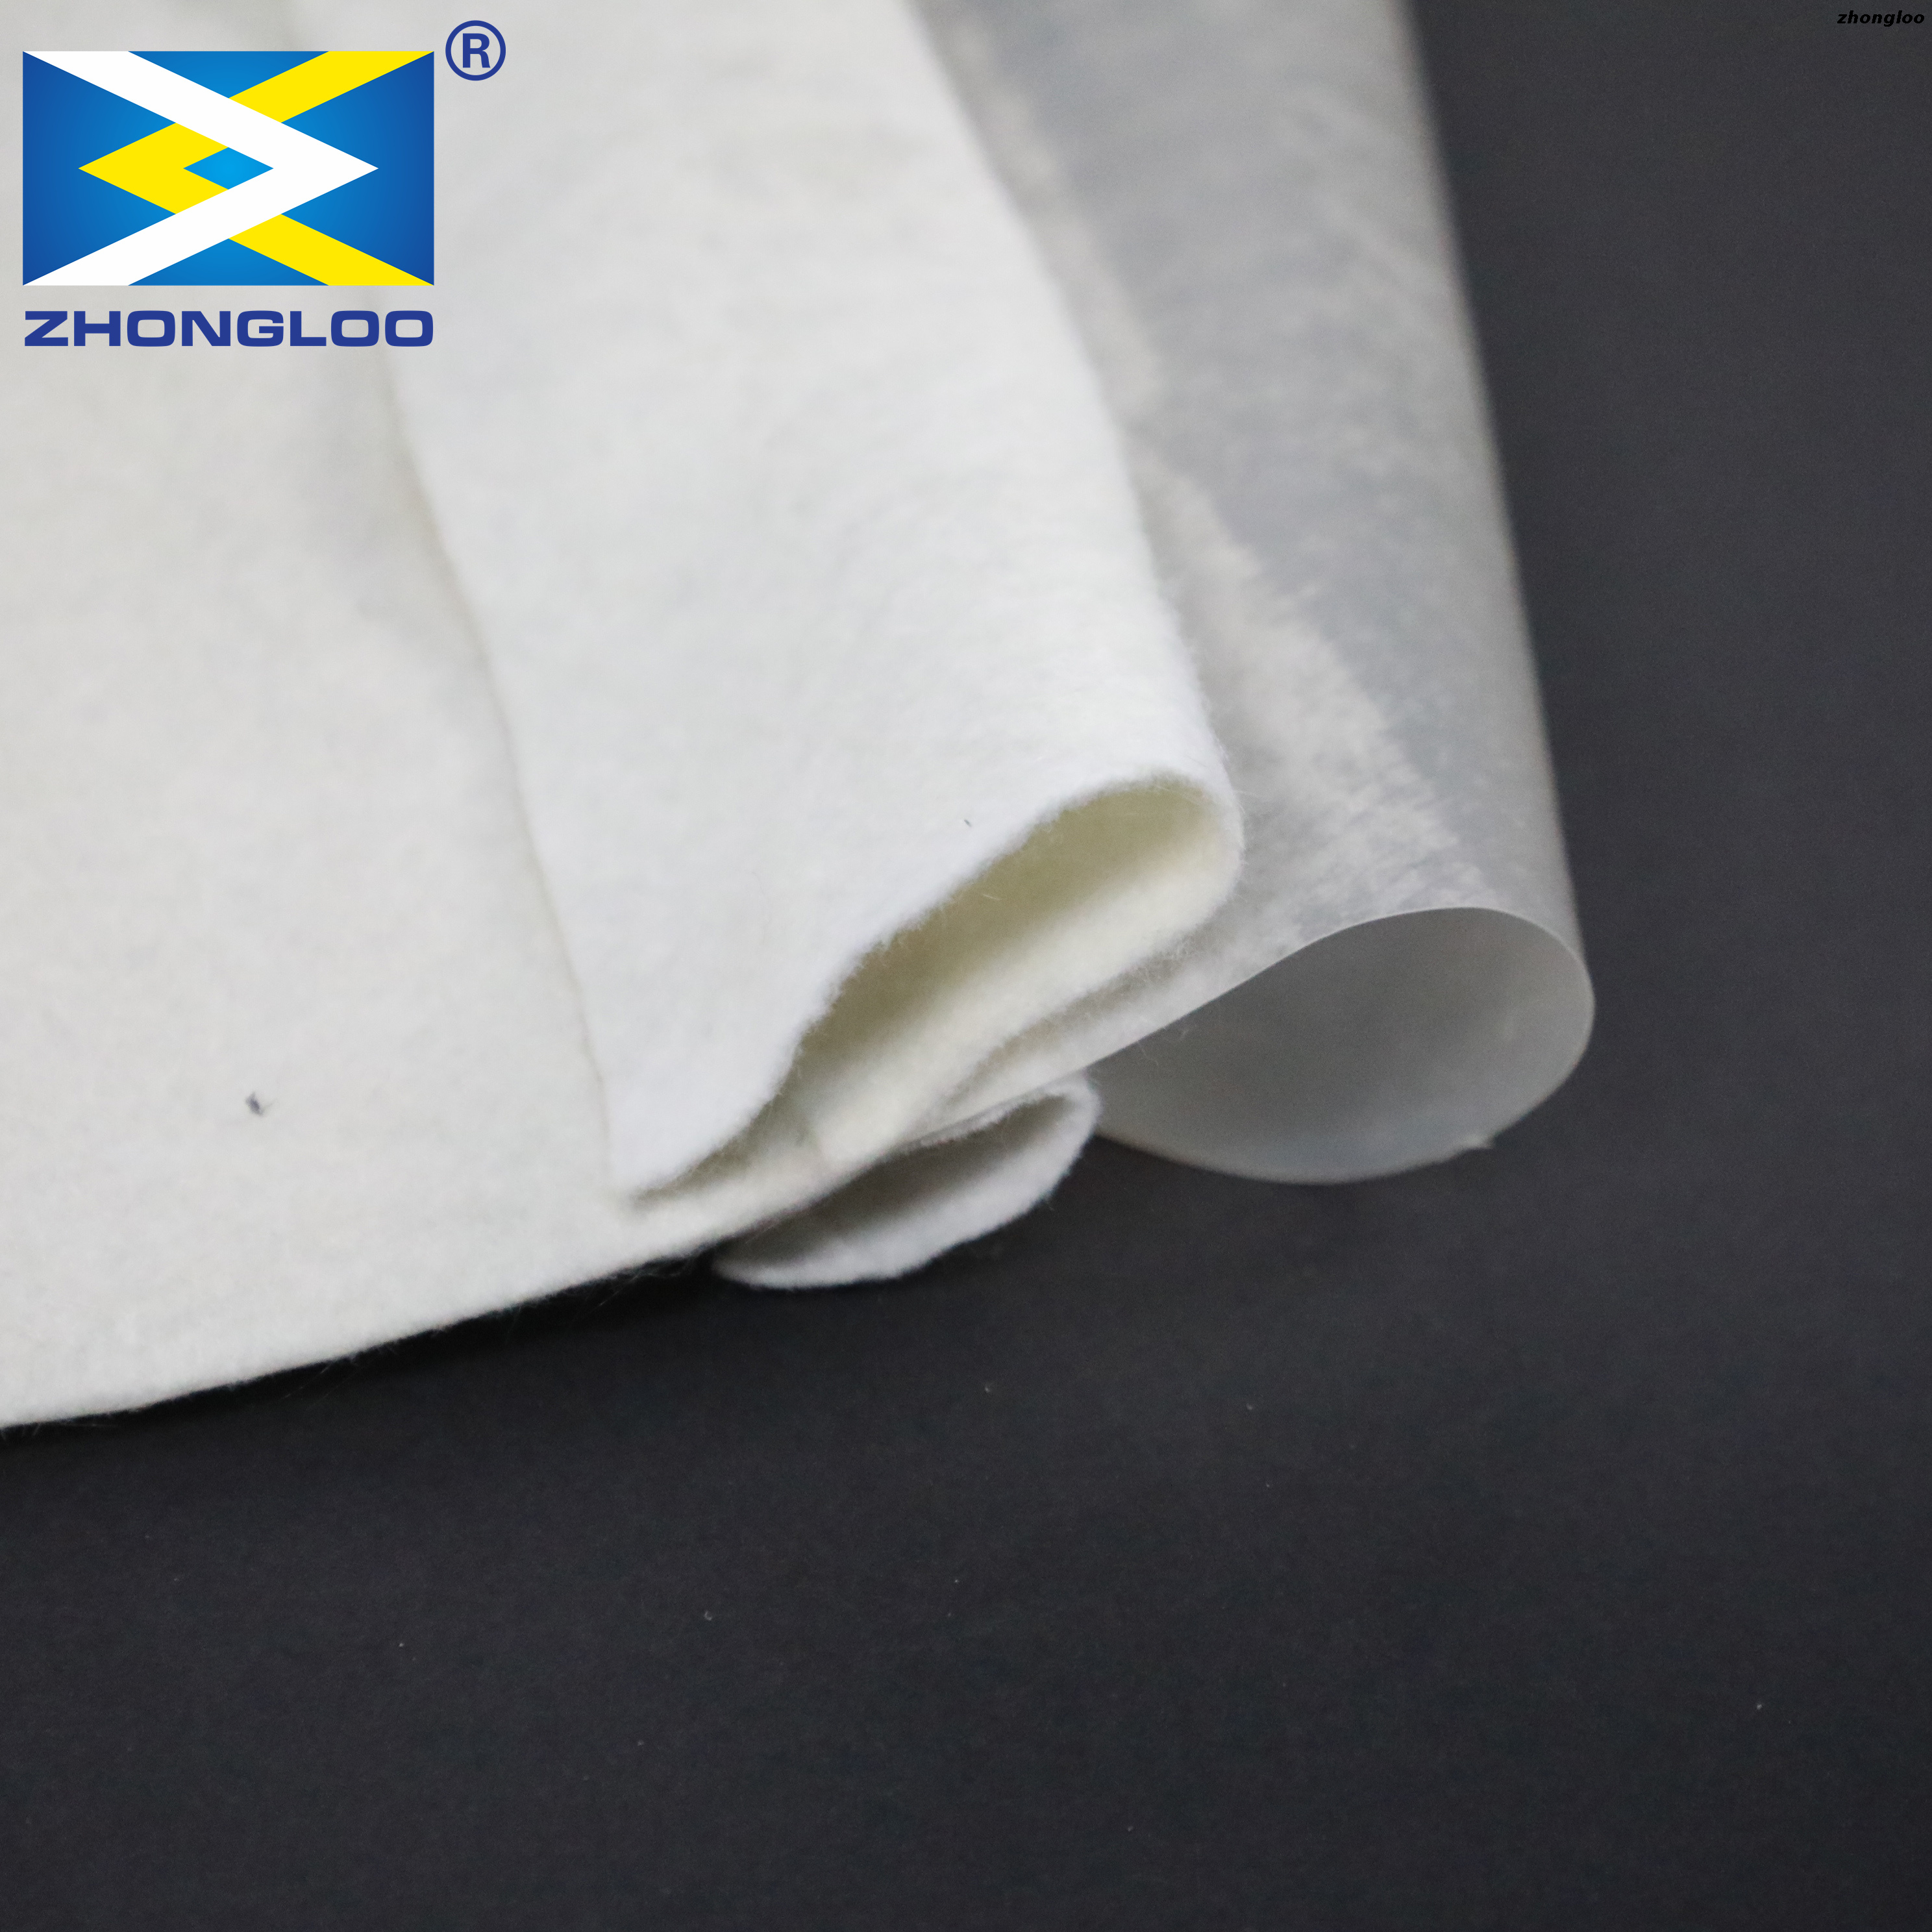 Good Quality Low Price Waterproof Composite Geotextile Membrane